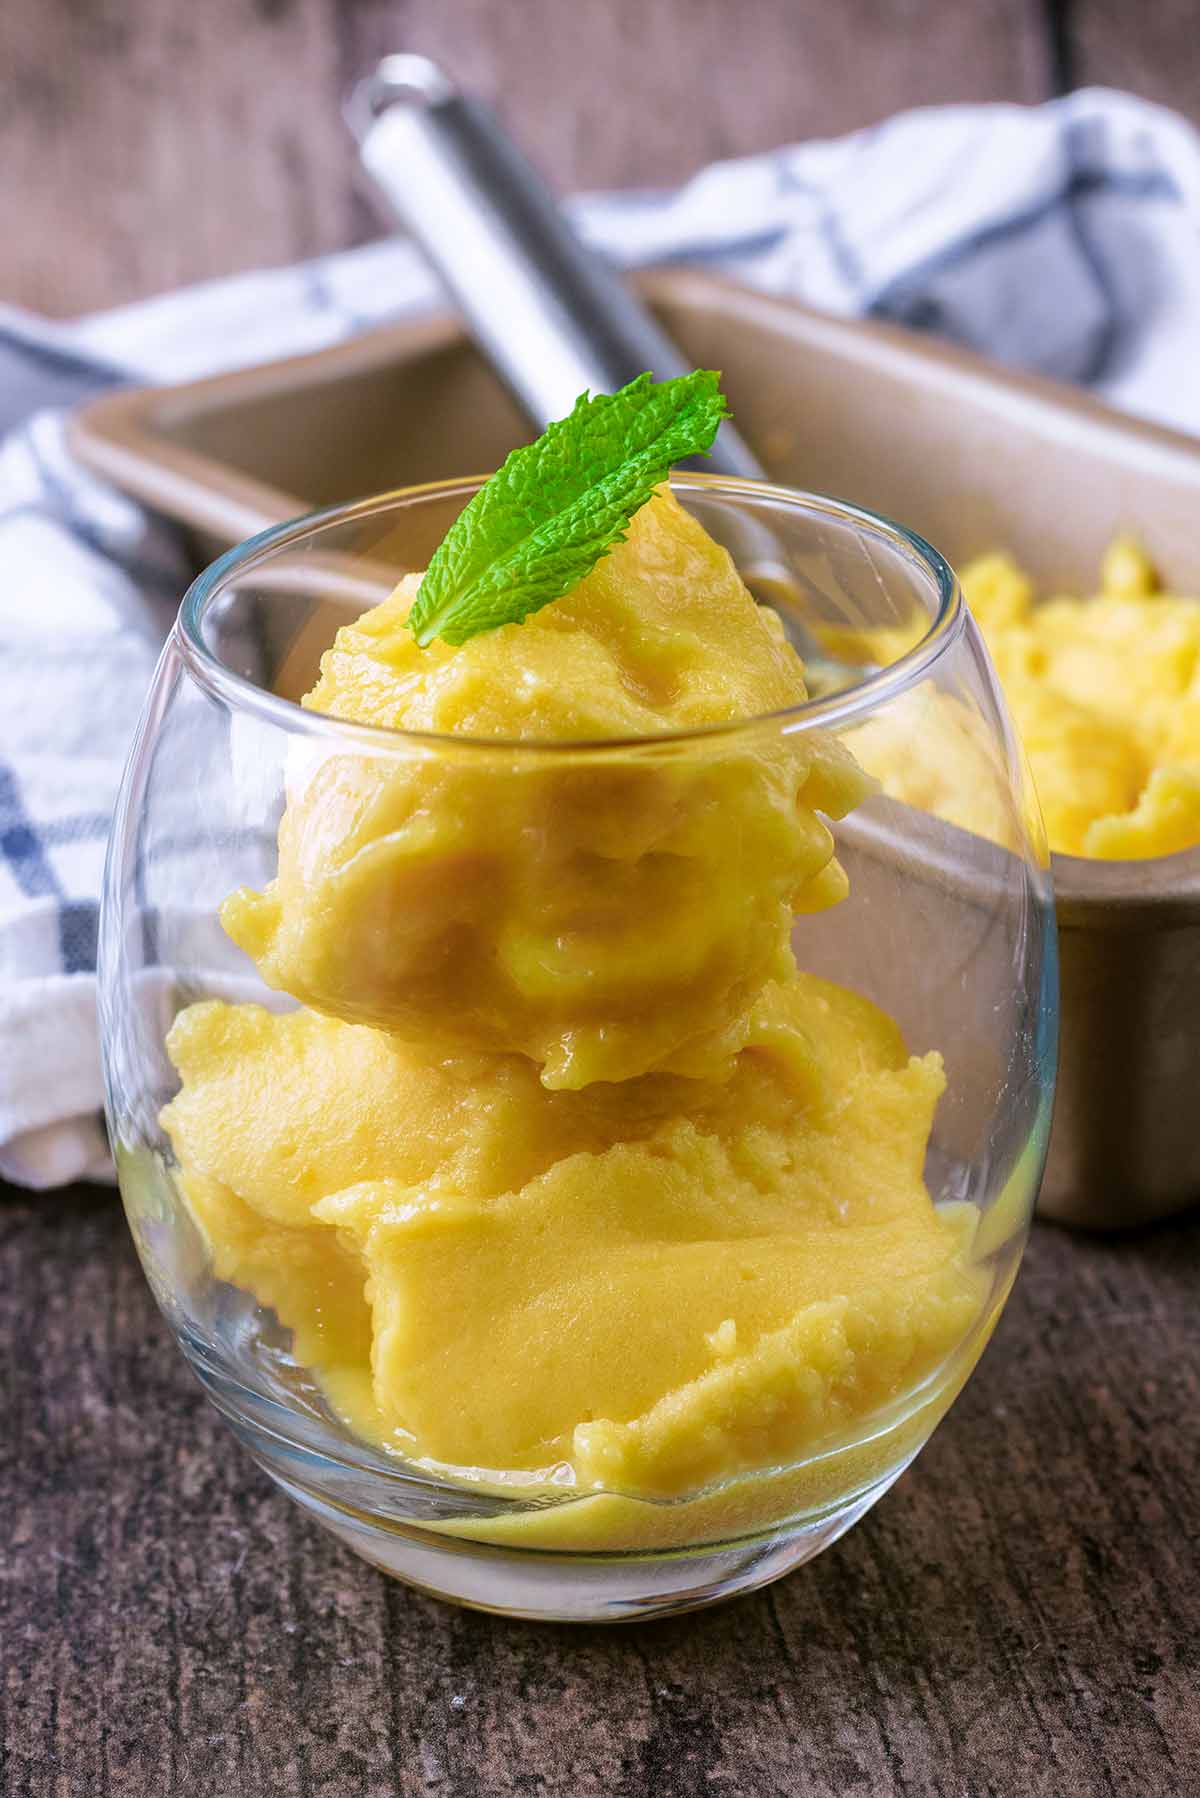 A serving glass containing mango sorbet topped with a mint leaf.